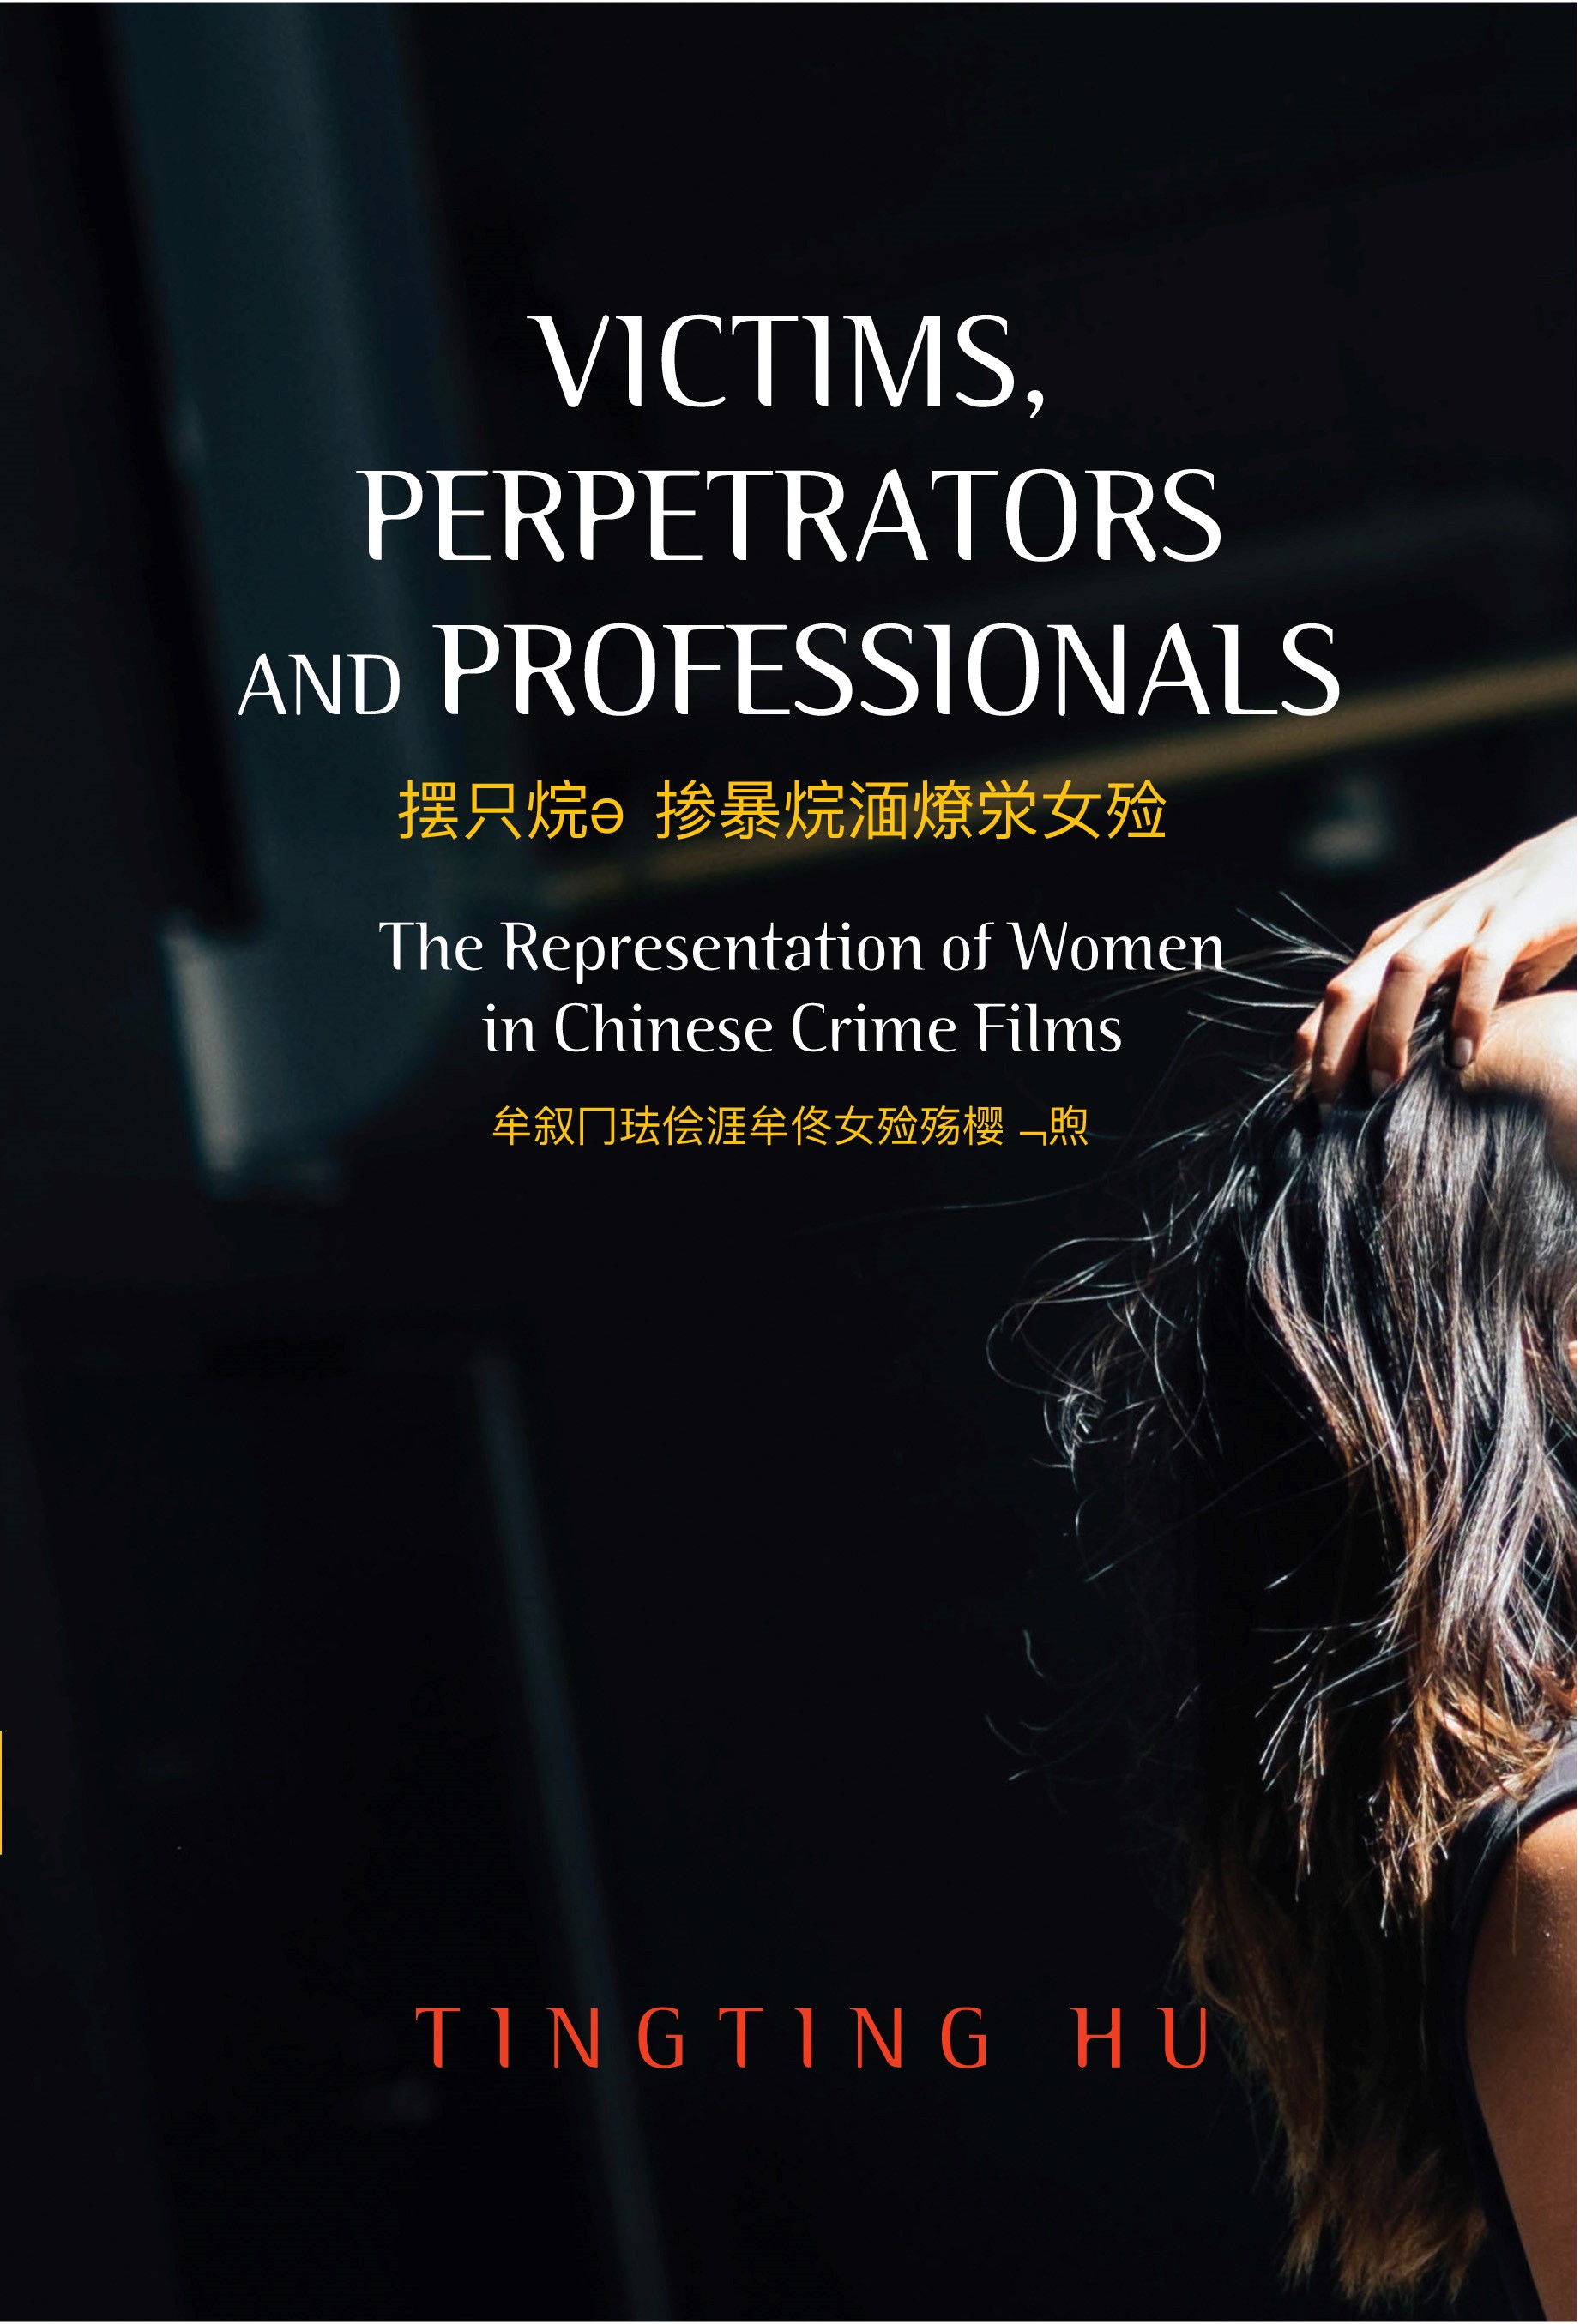 ISBN 9781782847250 product image for Victims, Perpetrators and Professionals | upcitemdb.com